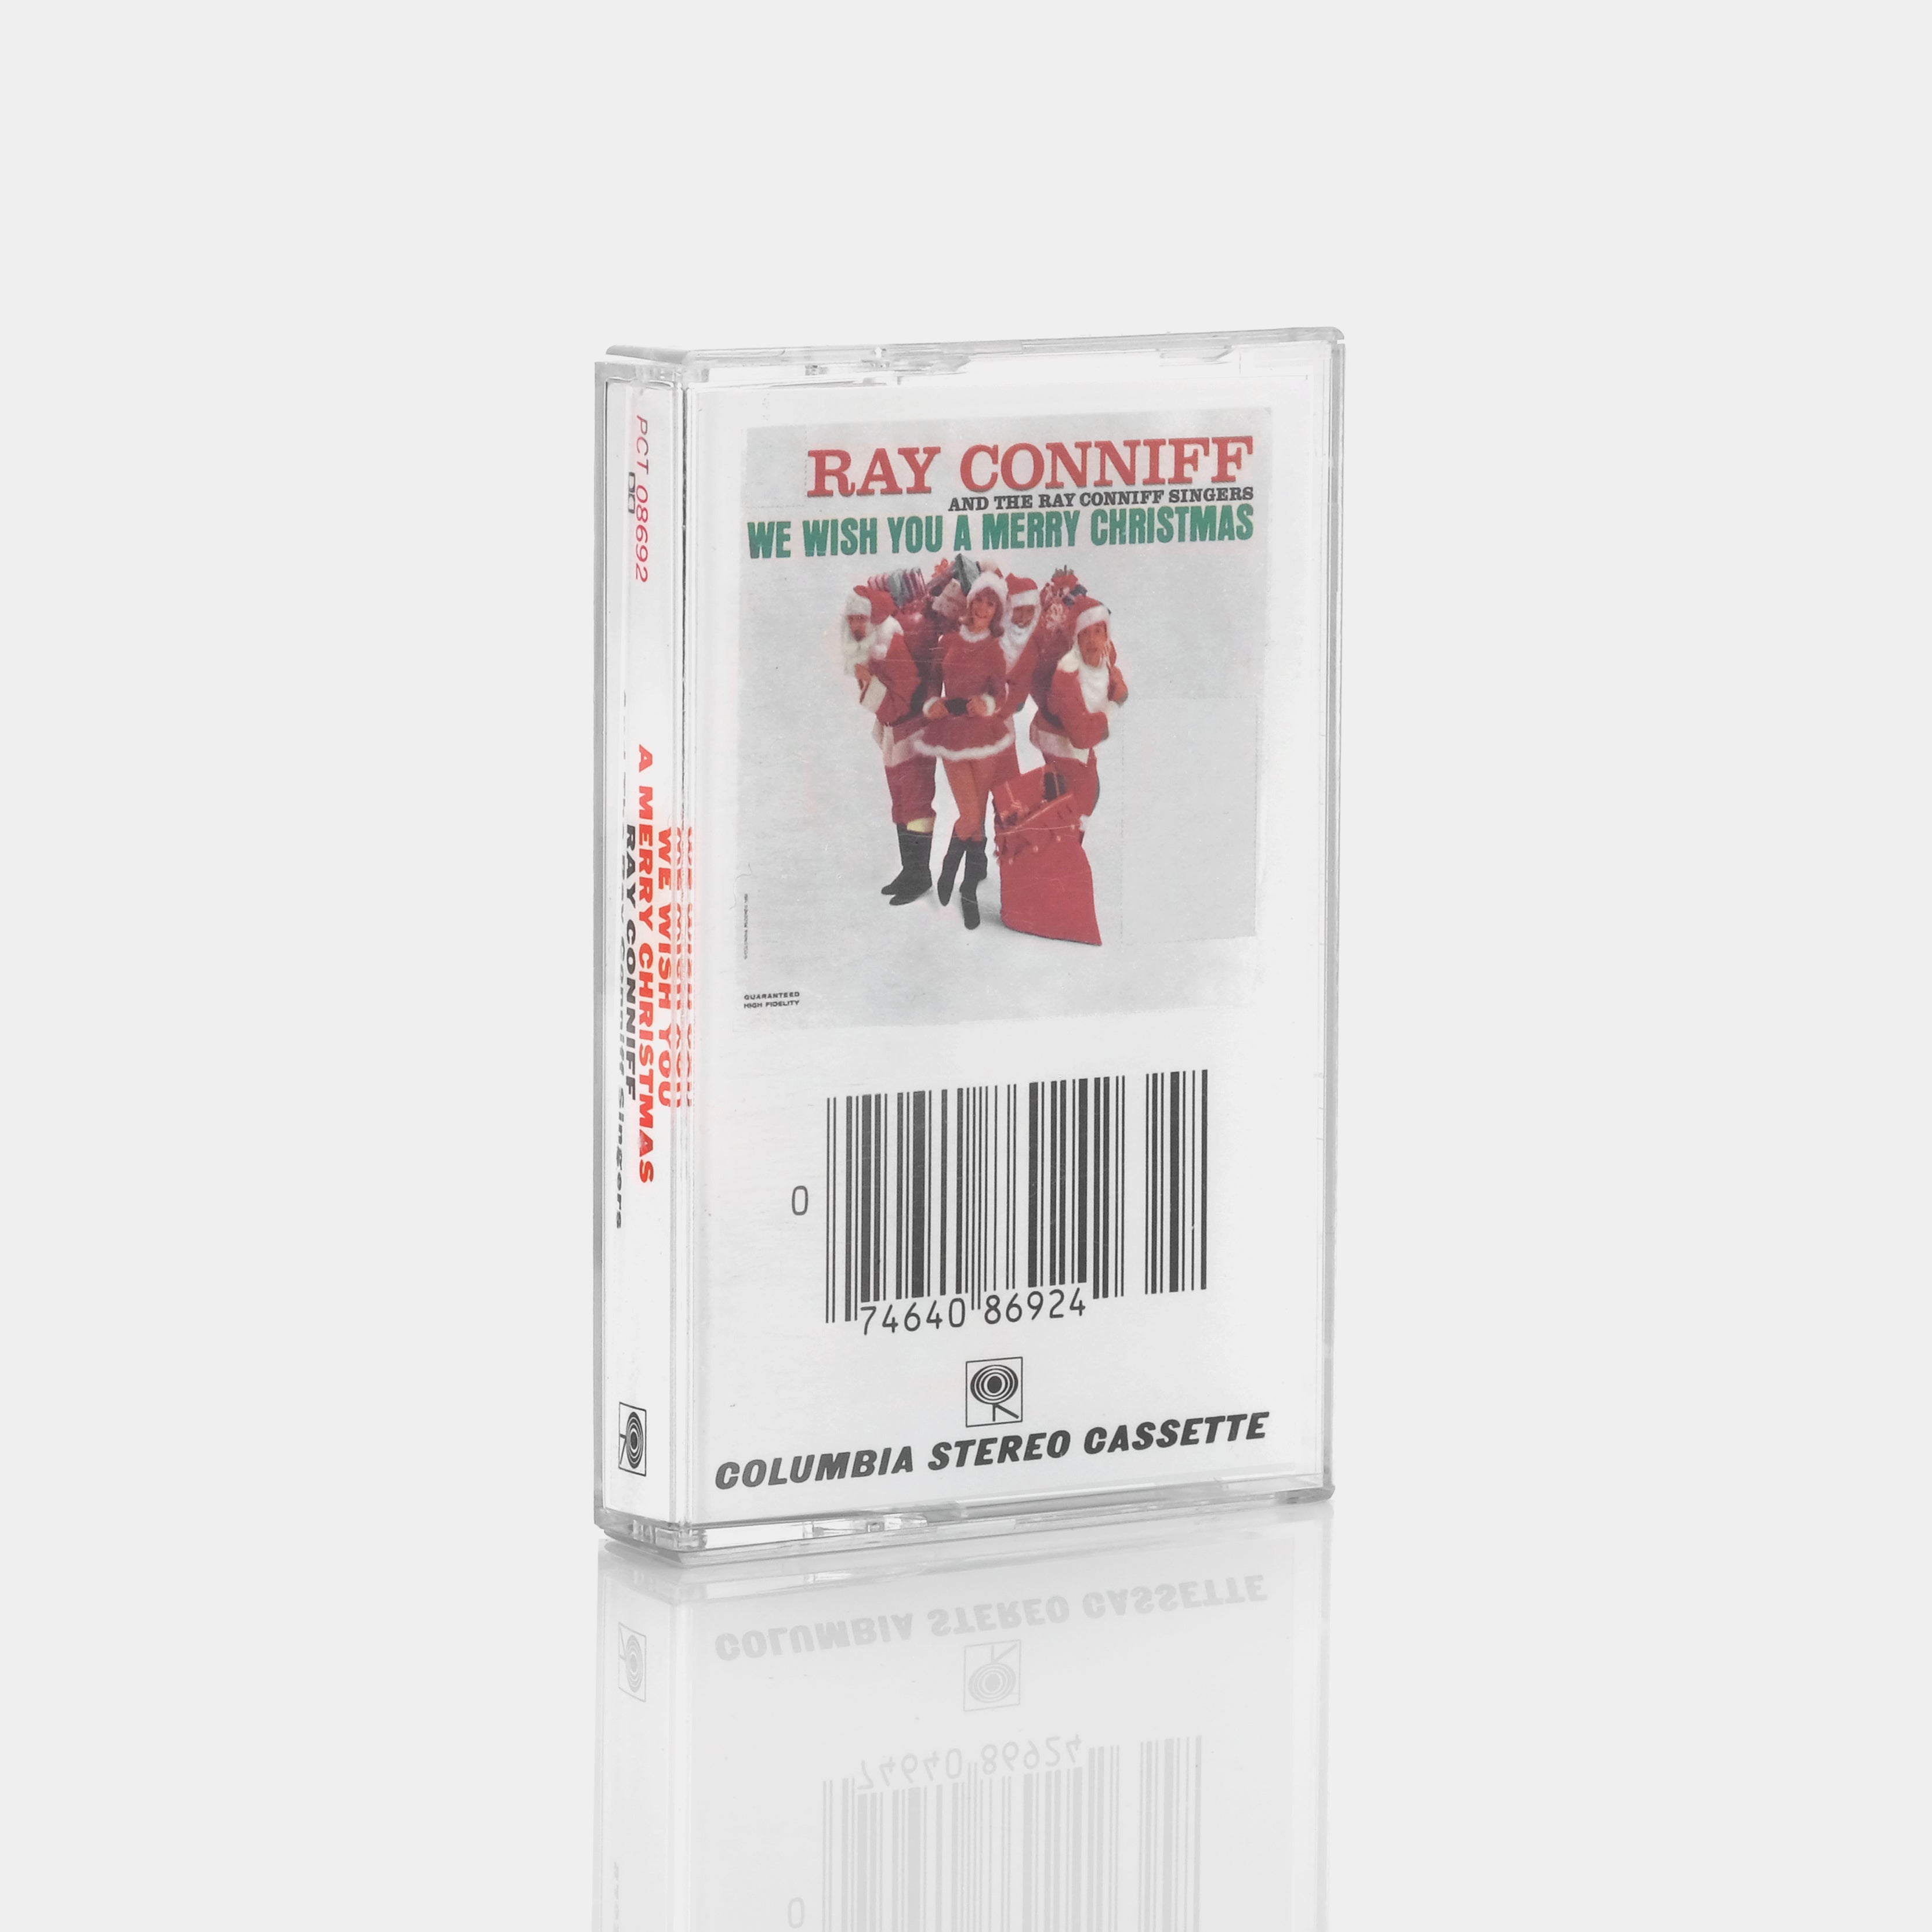 Ray Conniff And The Ray Conniff Singers - We Wish You A Merry Christmas Cassette Tape